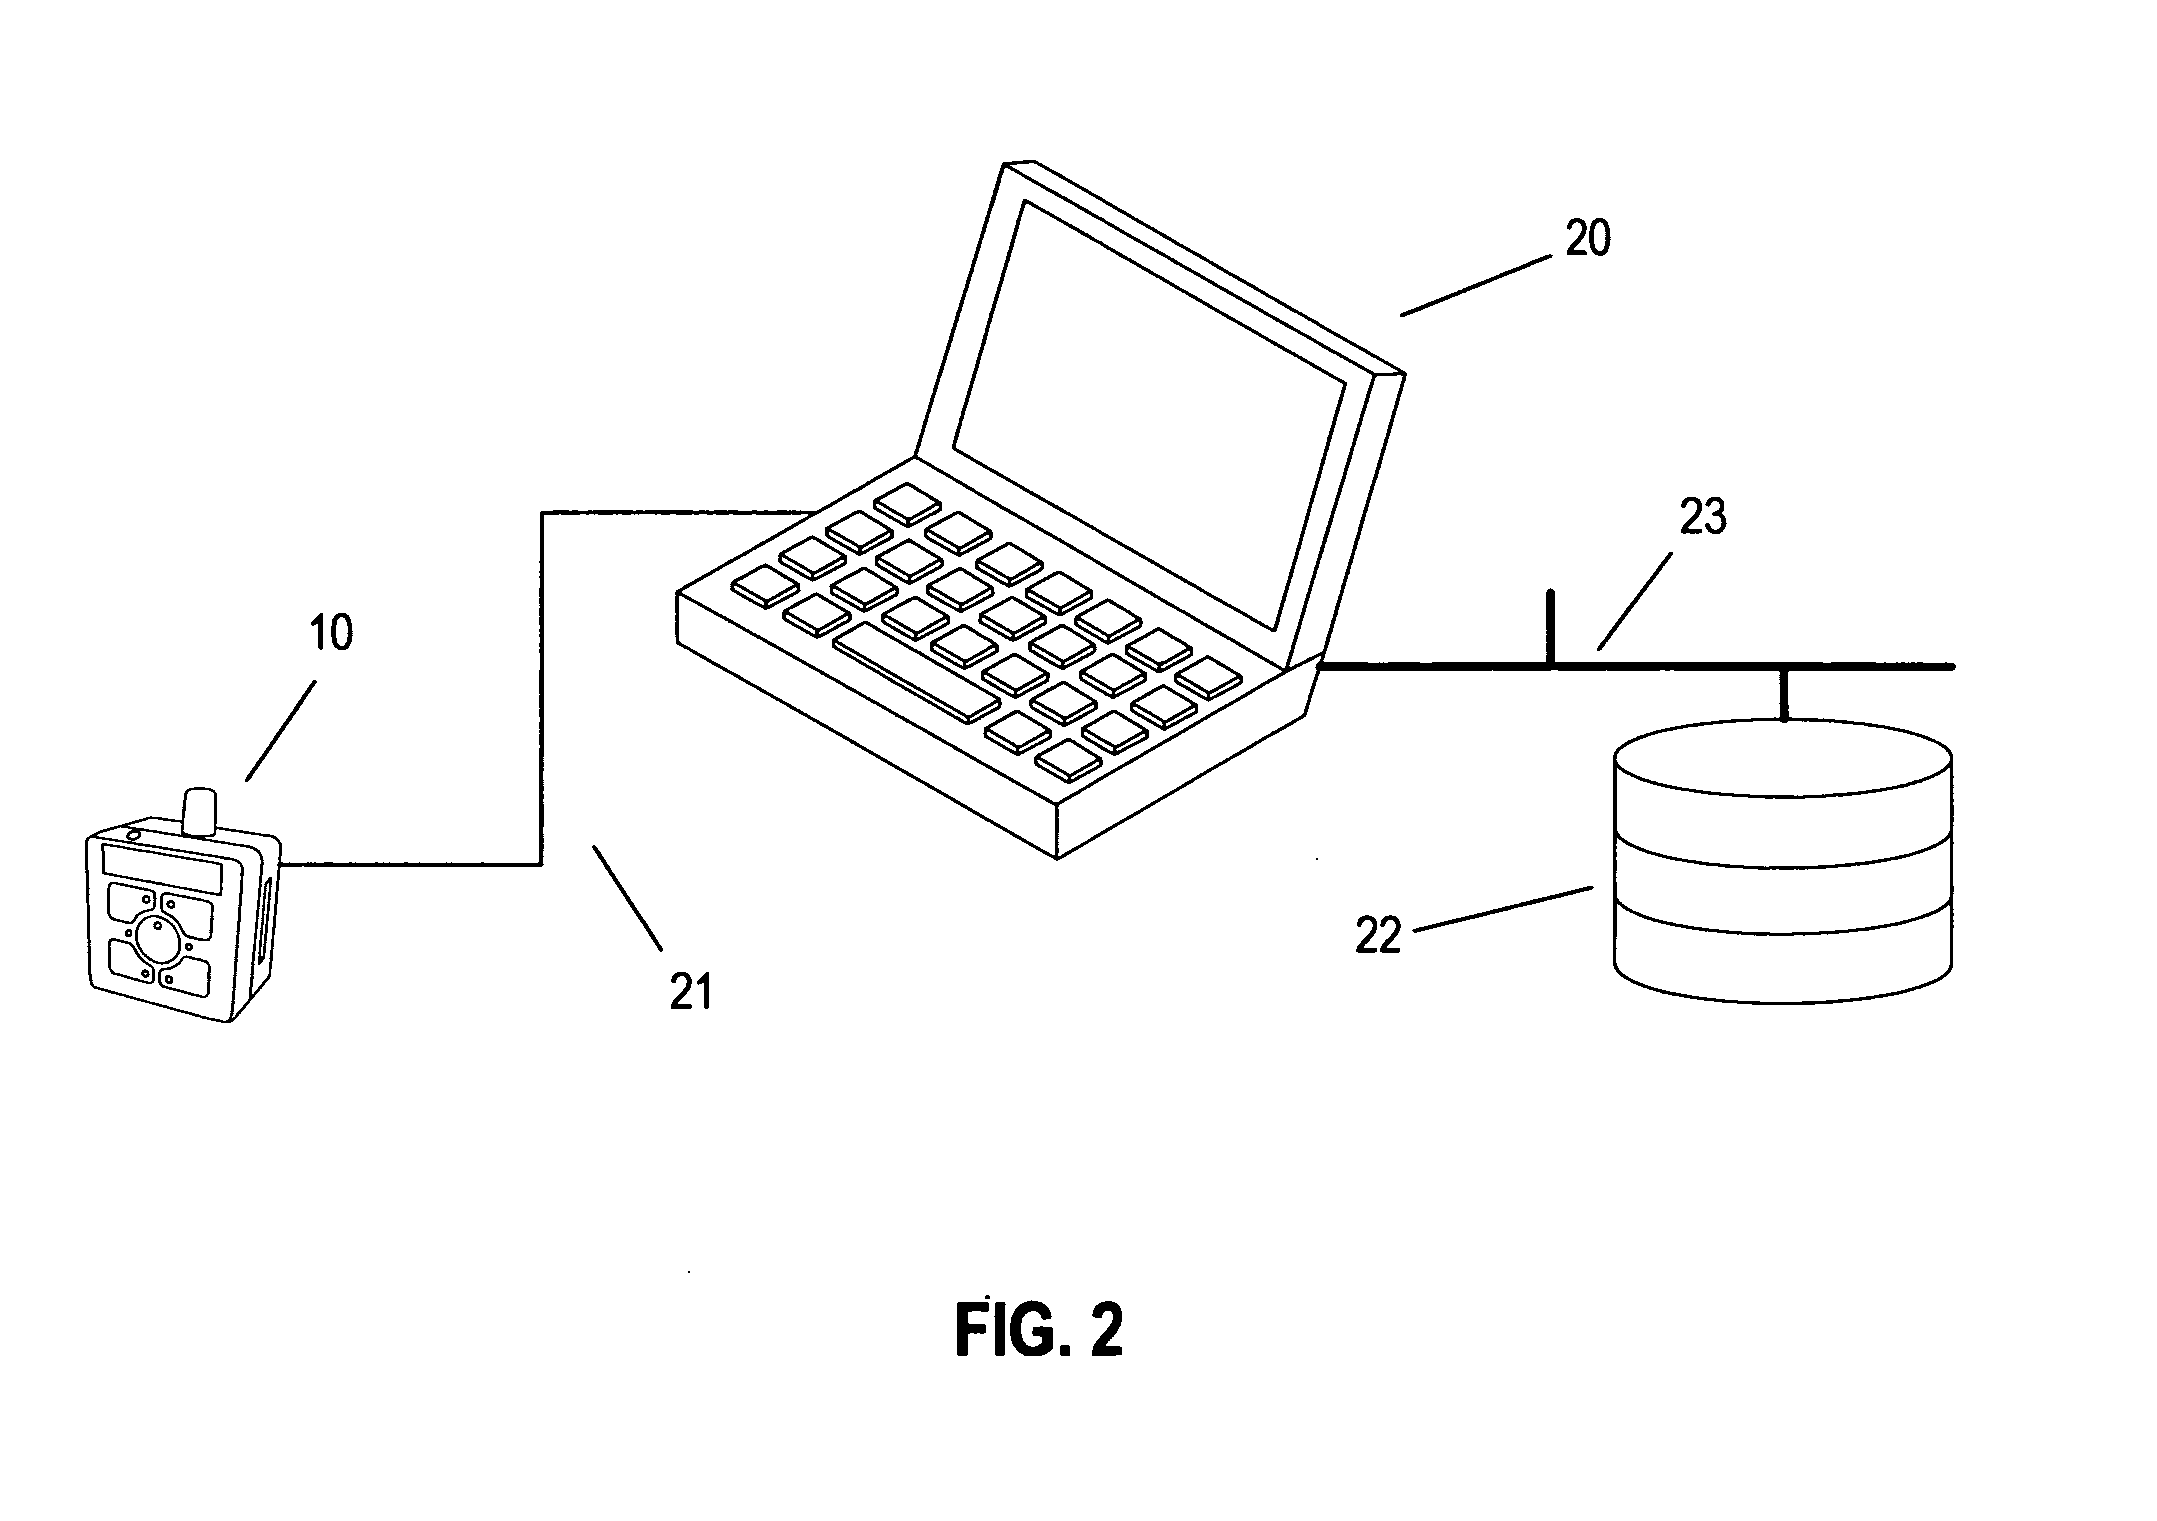 Low-cost flight training and synthetic visualization system and method